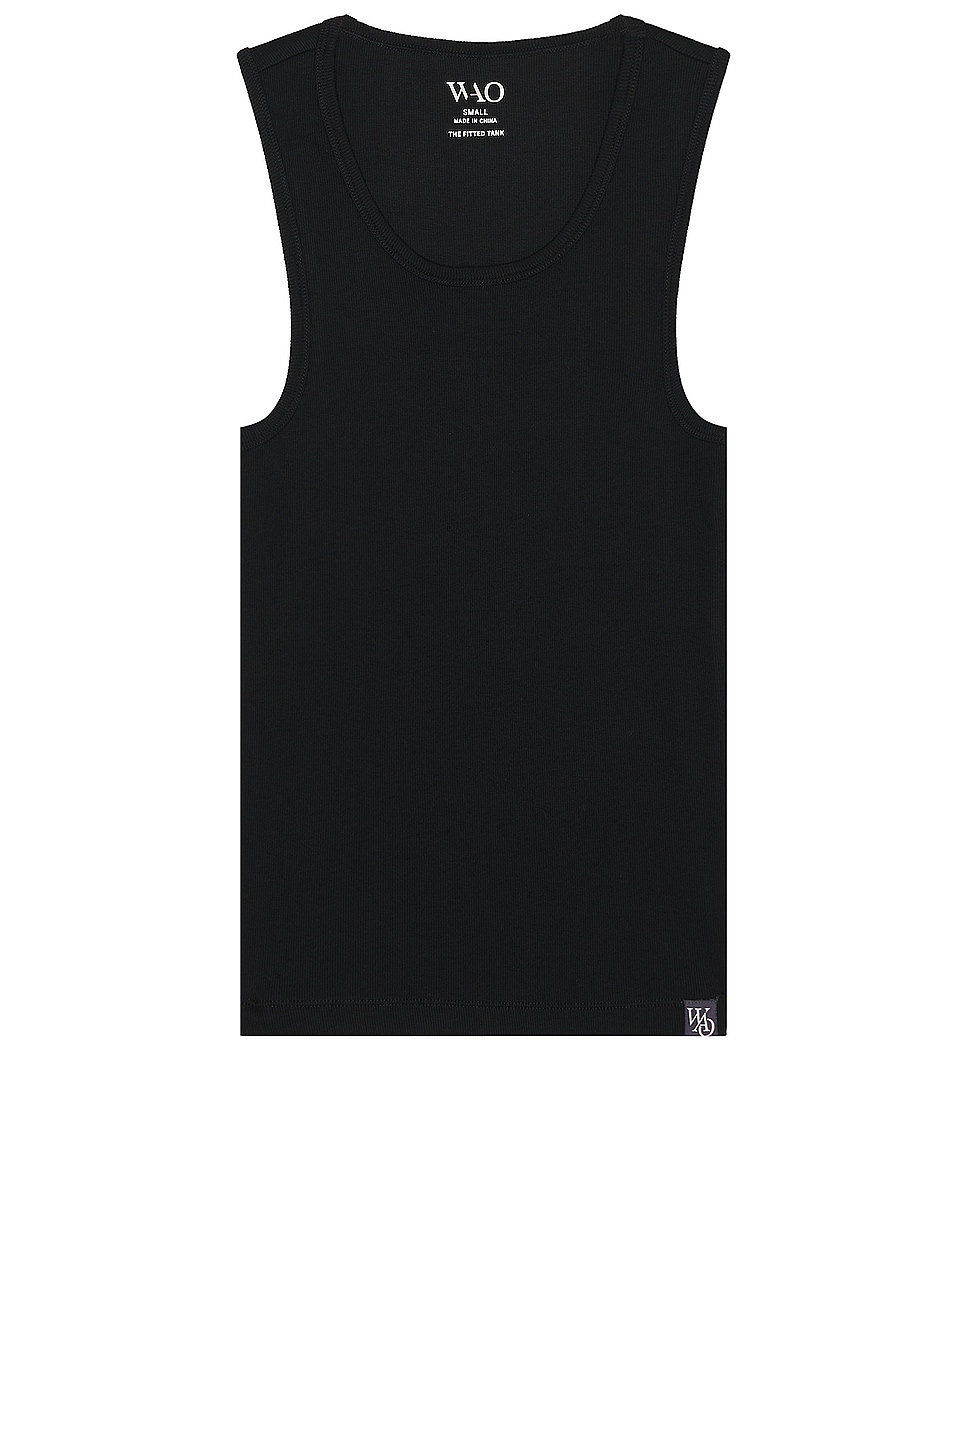 Image 1 of WAO The Fitted Tank in Black